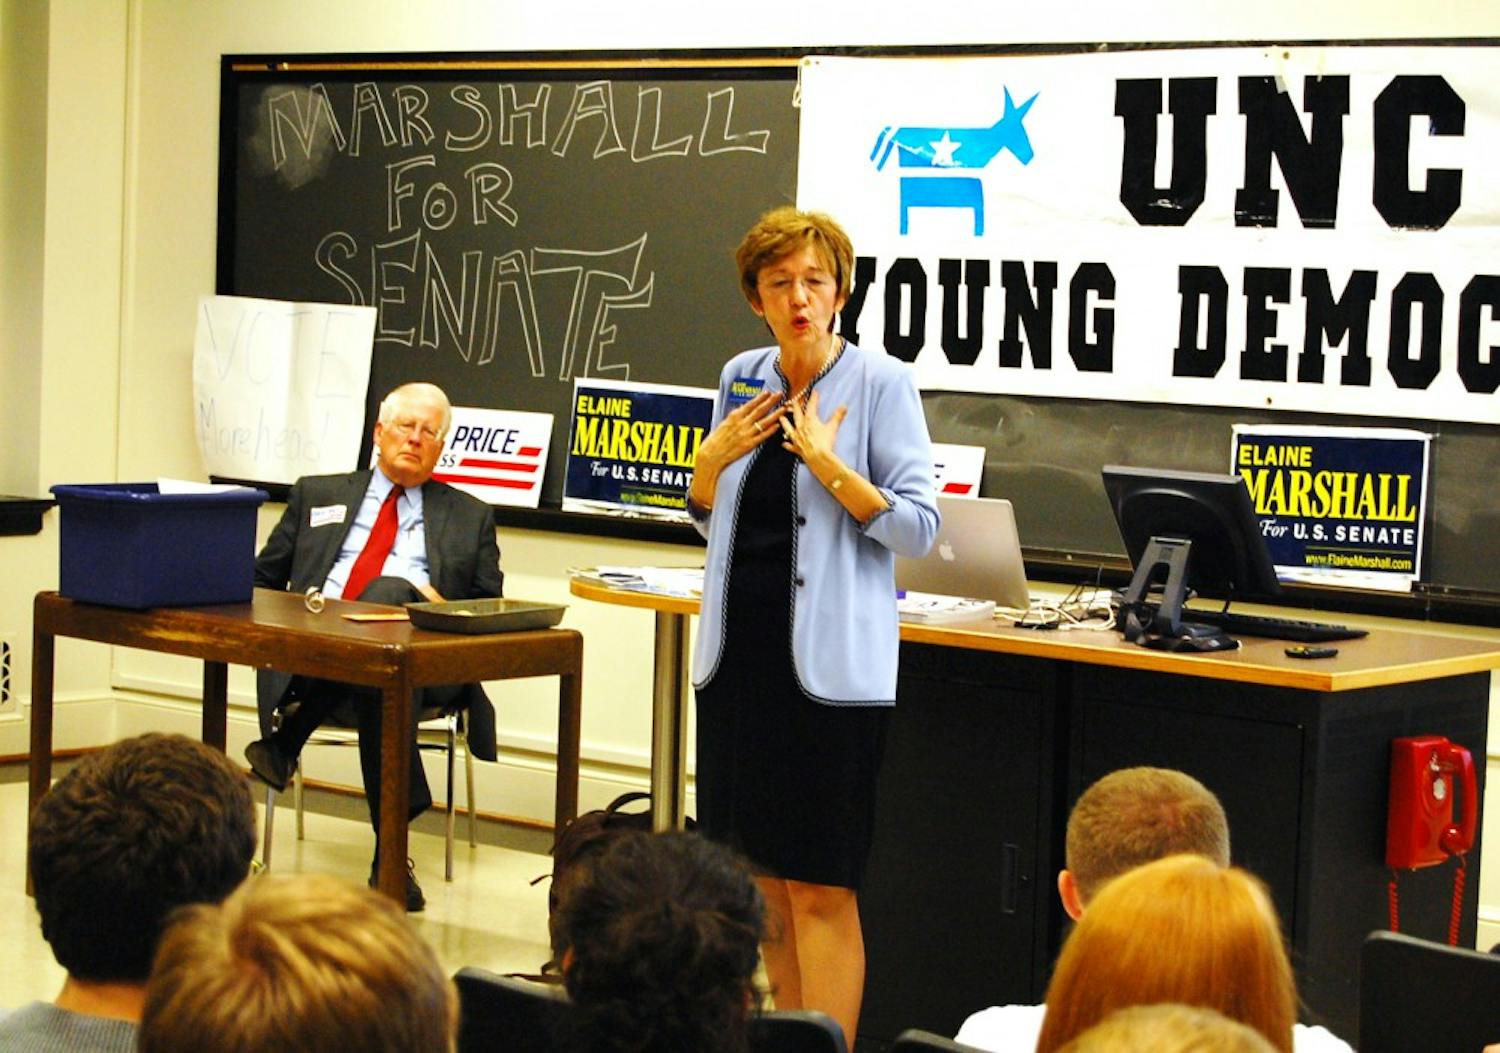 Democratic Senate candidate Elaine Marshall speaks to UNC Young Democrats in a rally held in Gardner on Wednesday. U.S. Rep. David Price, who spoke earlier in the evening, listens on as Marshall outlines her campaign and critical issues for the upcoming election.